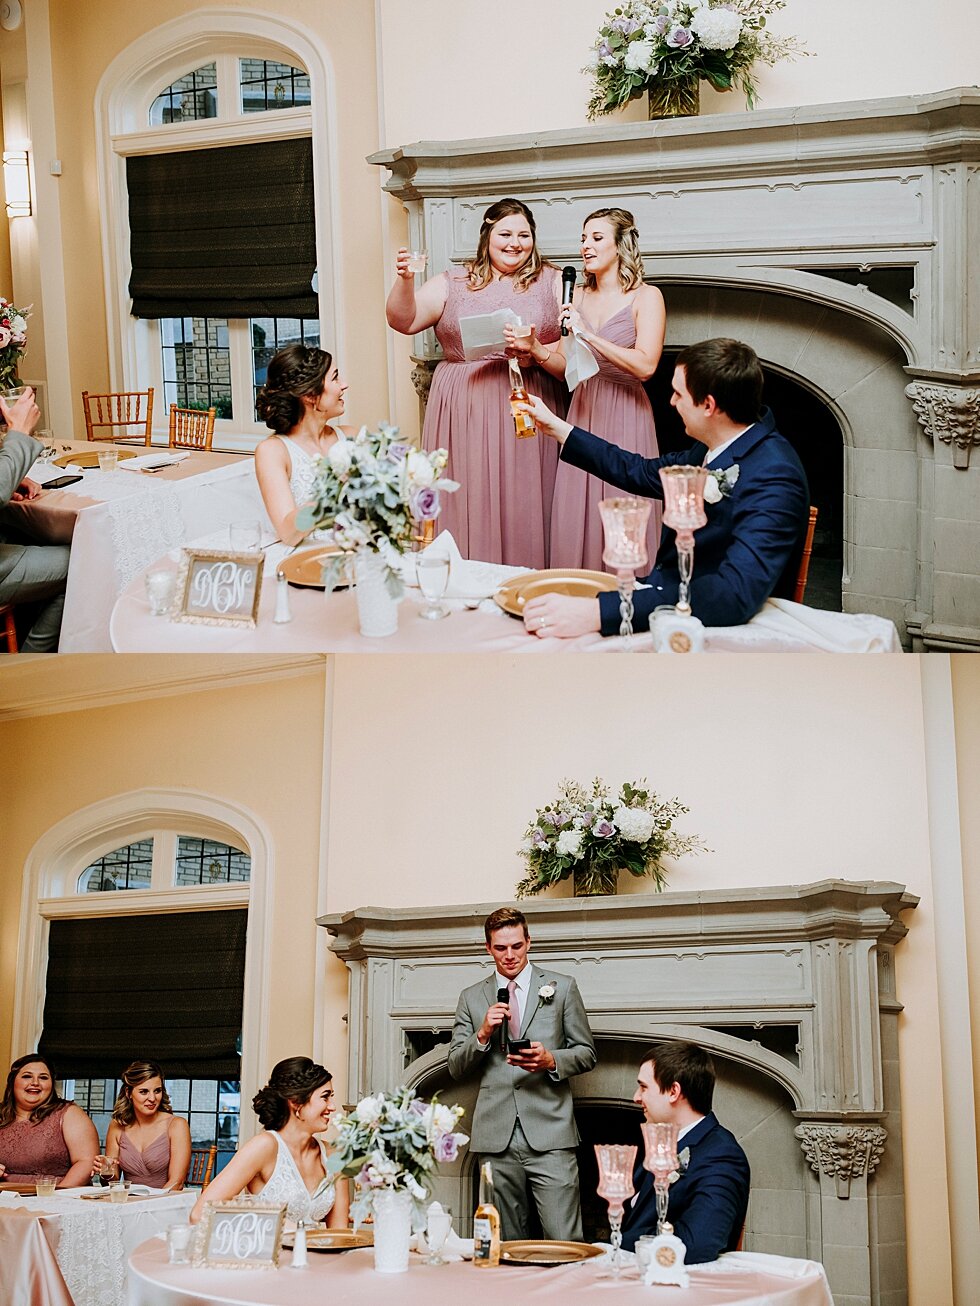  True character shines when the speeches begin. These speeches were from the heart and wonderful. #weddinggoals #weddingphotographer #married #ceremonyandreception #indianaphotographer #louisvillephotographer #weddingphotos #husbandandwife #gorgeousw